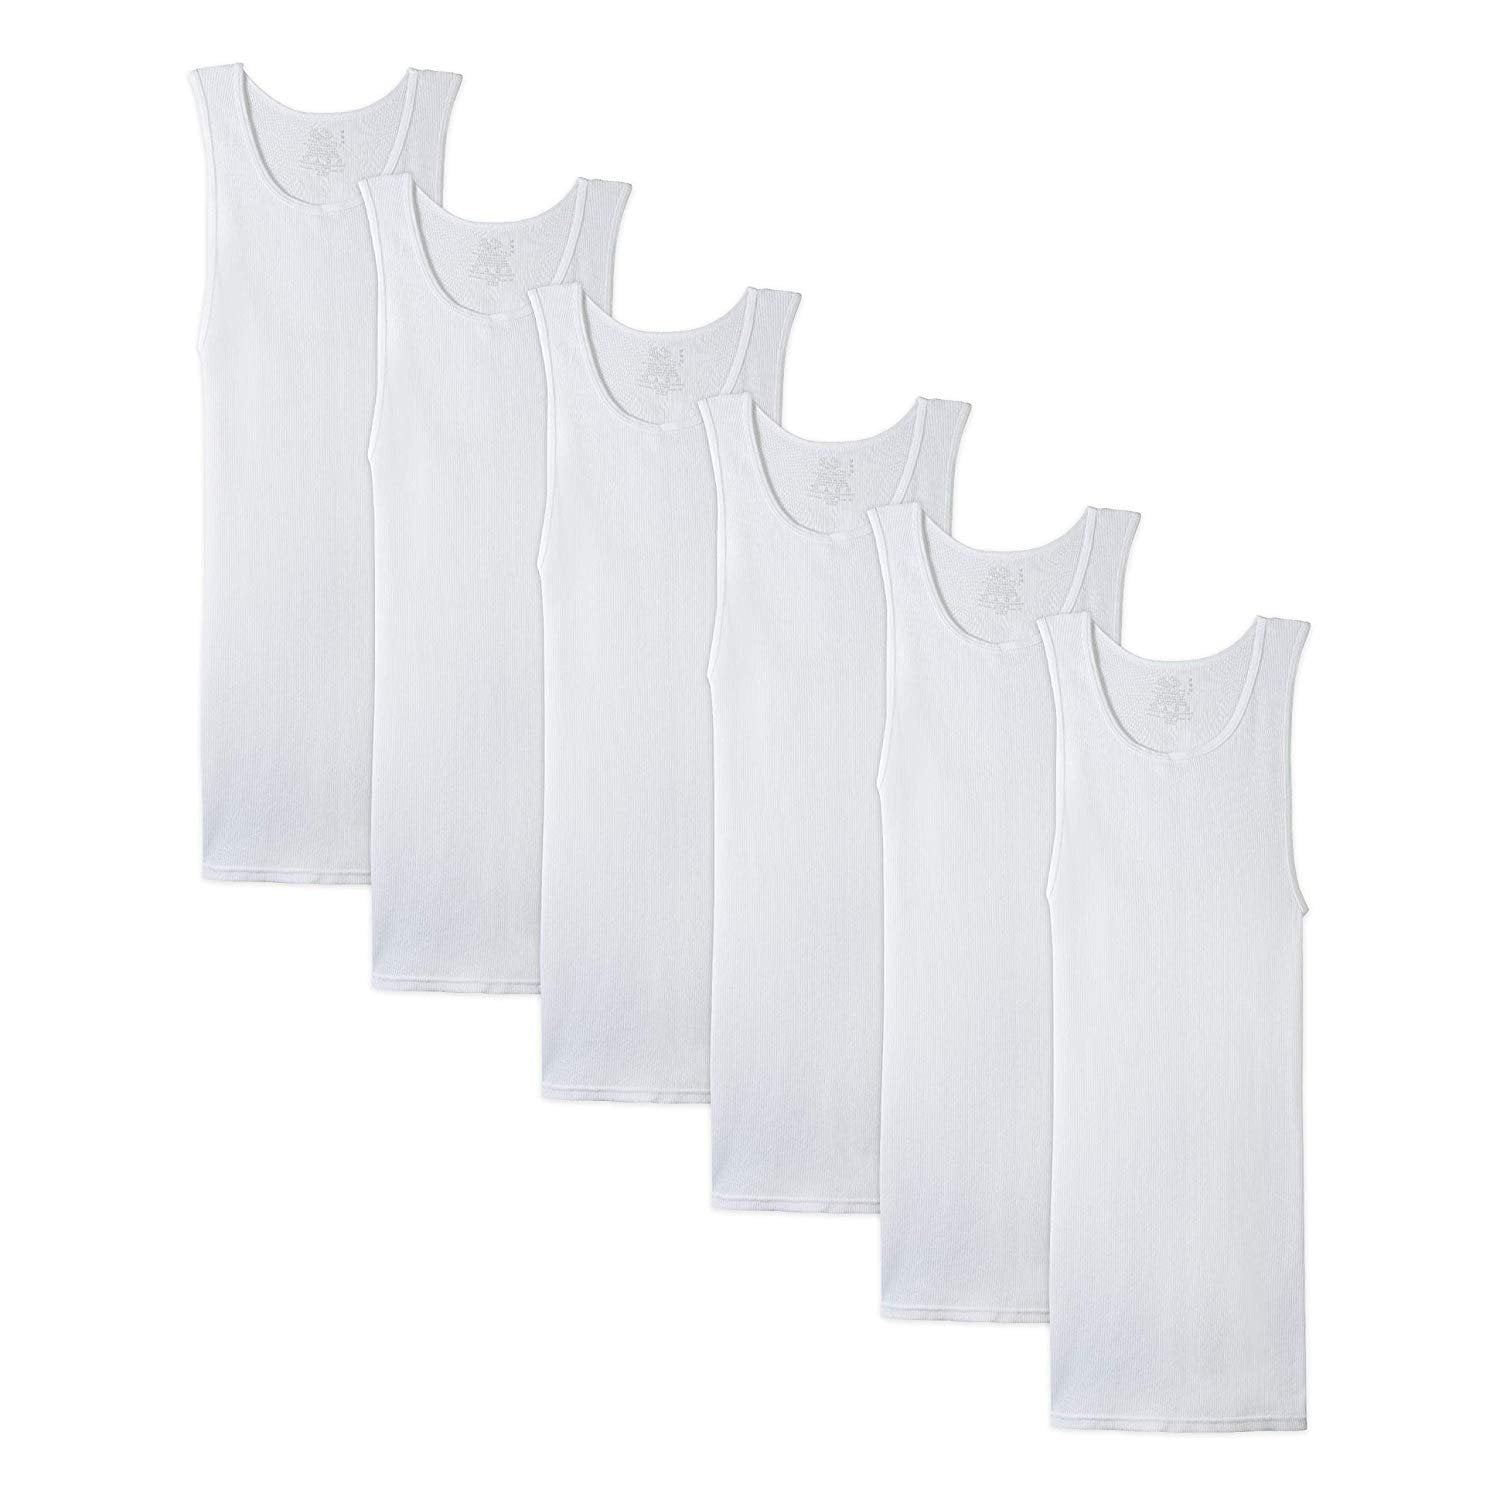 Fruit of the Loom Classic White A-shirts, Large 6 Pack - Walmart.com